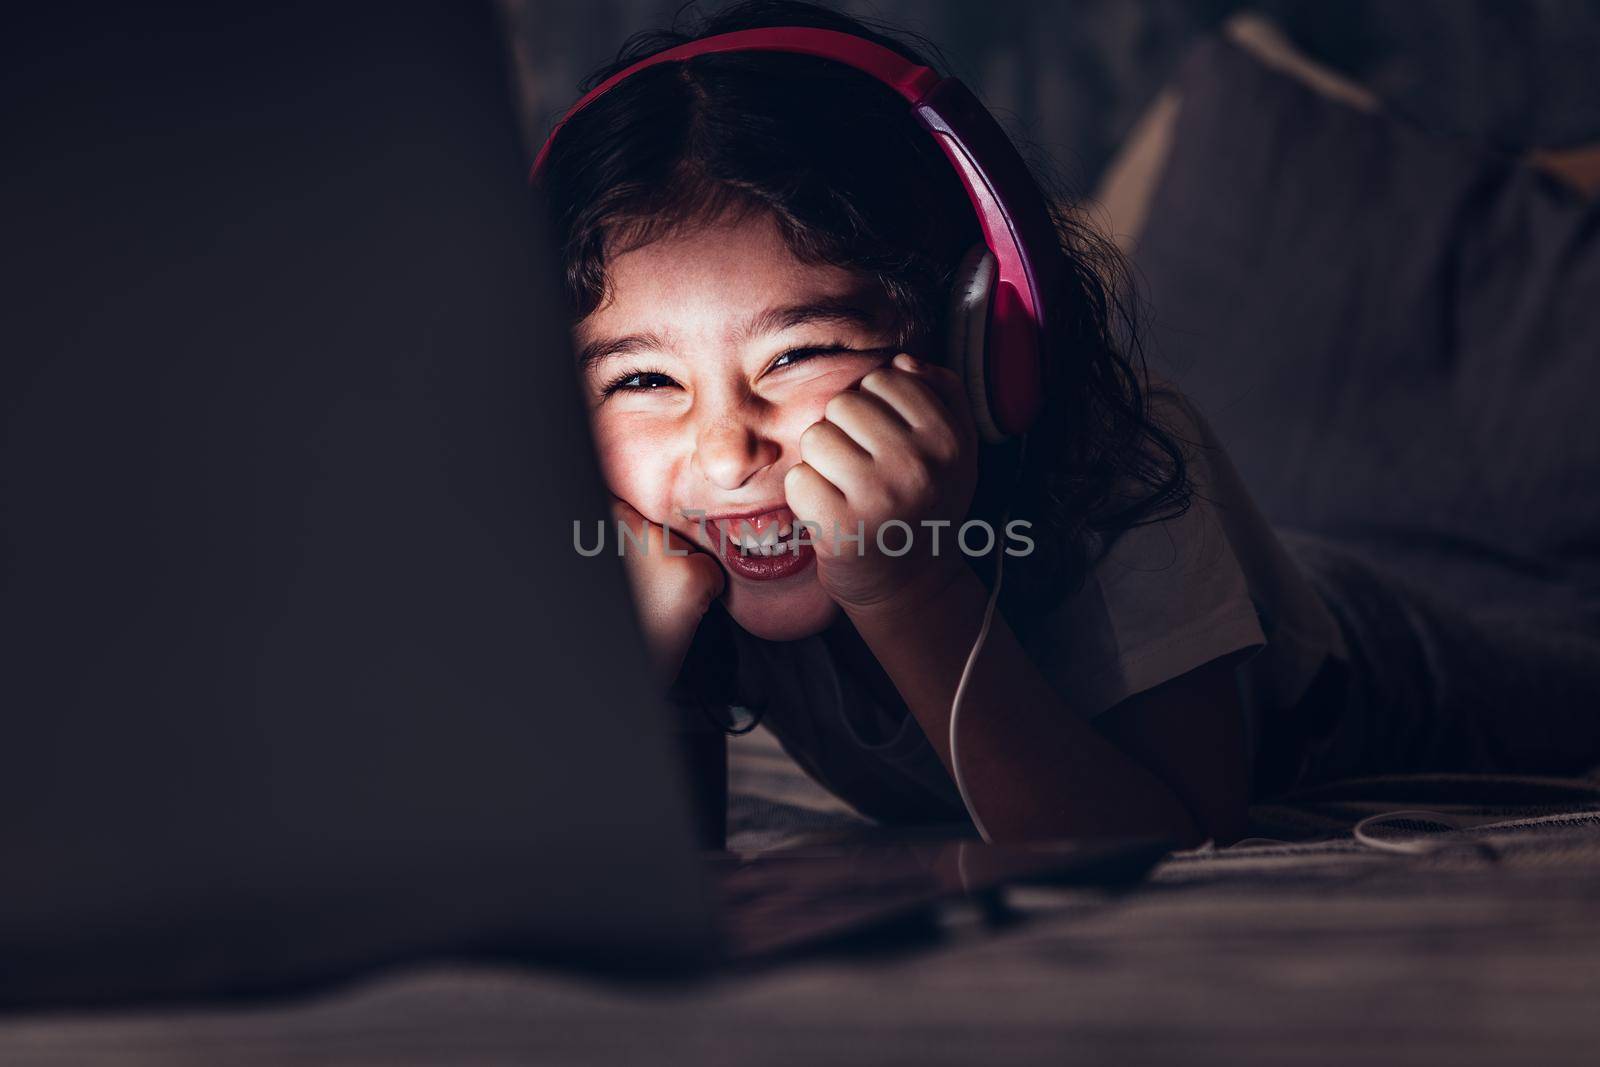 little girl lying in bed laughing while watching a movie on a laptop in the darkness, has a pink headset, child and technology concept, copy space for text